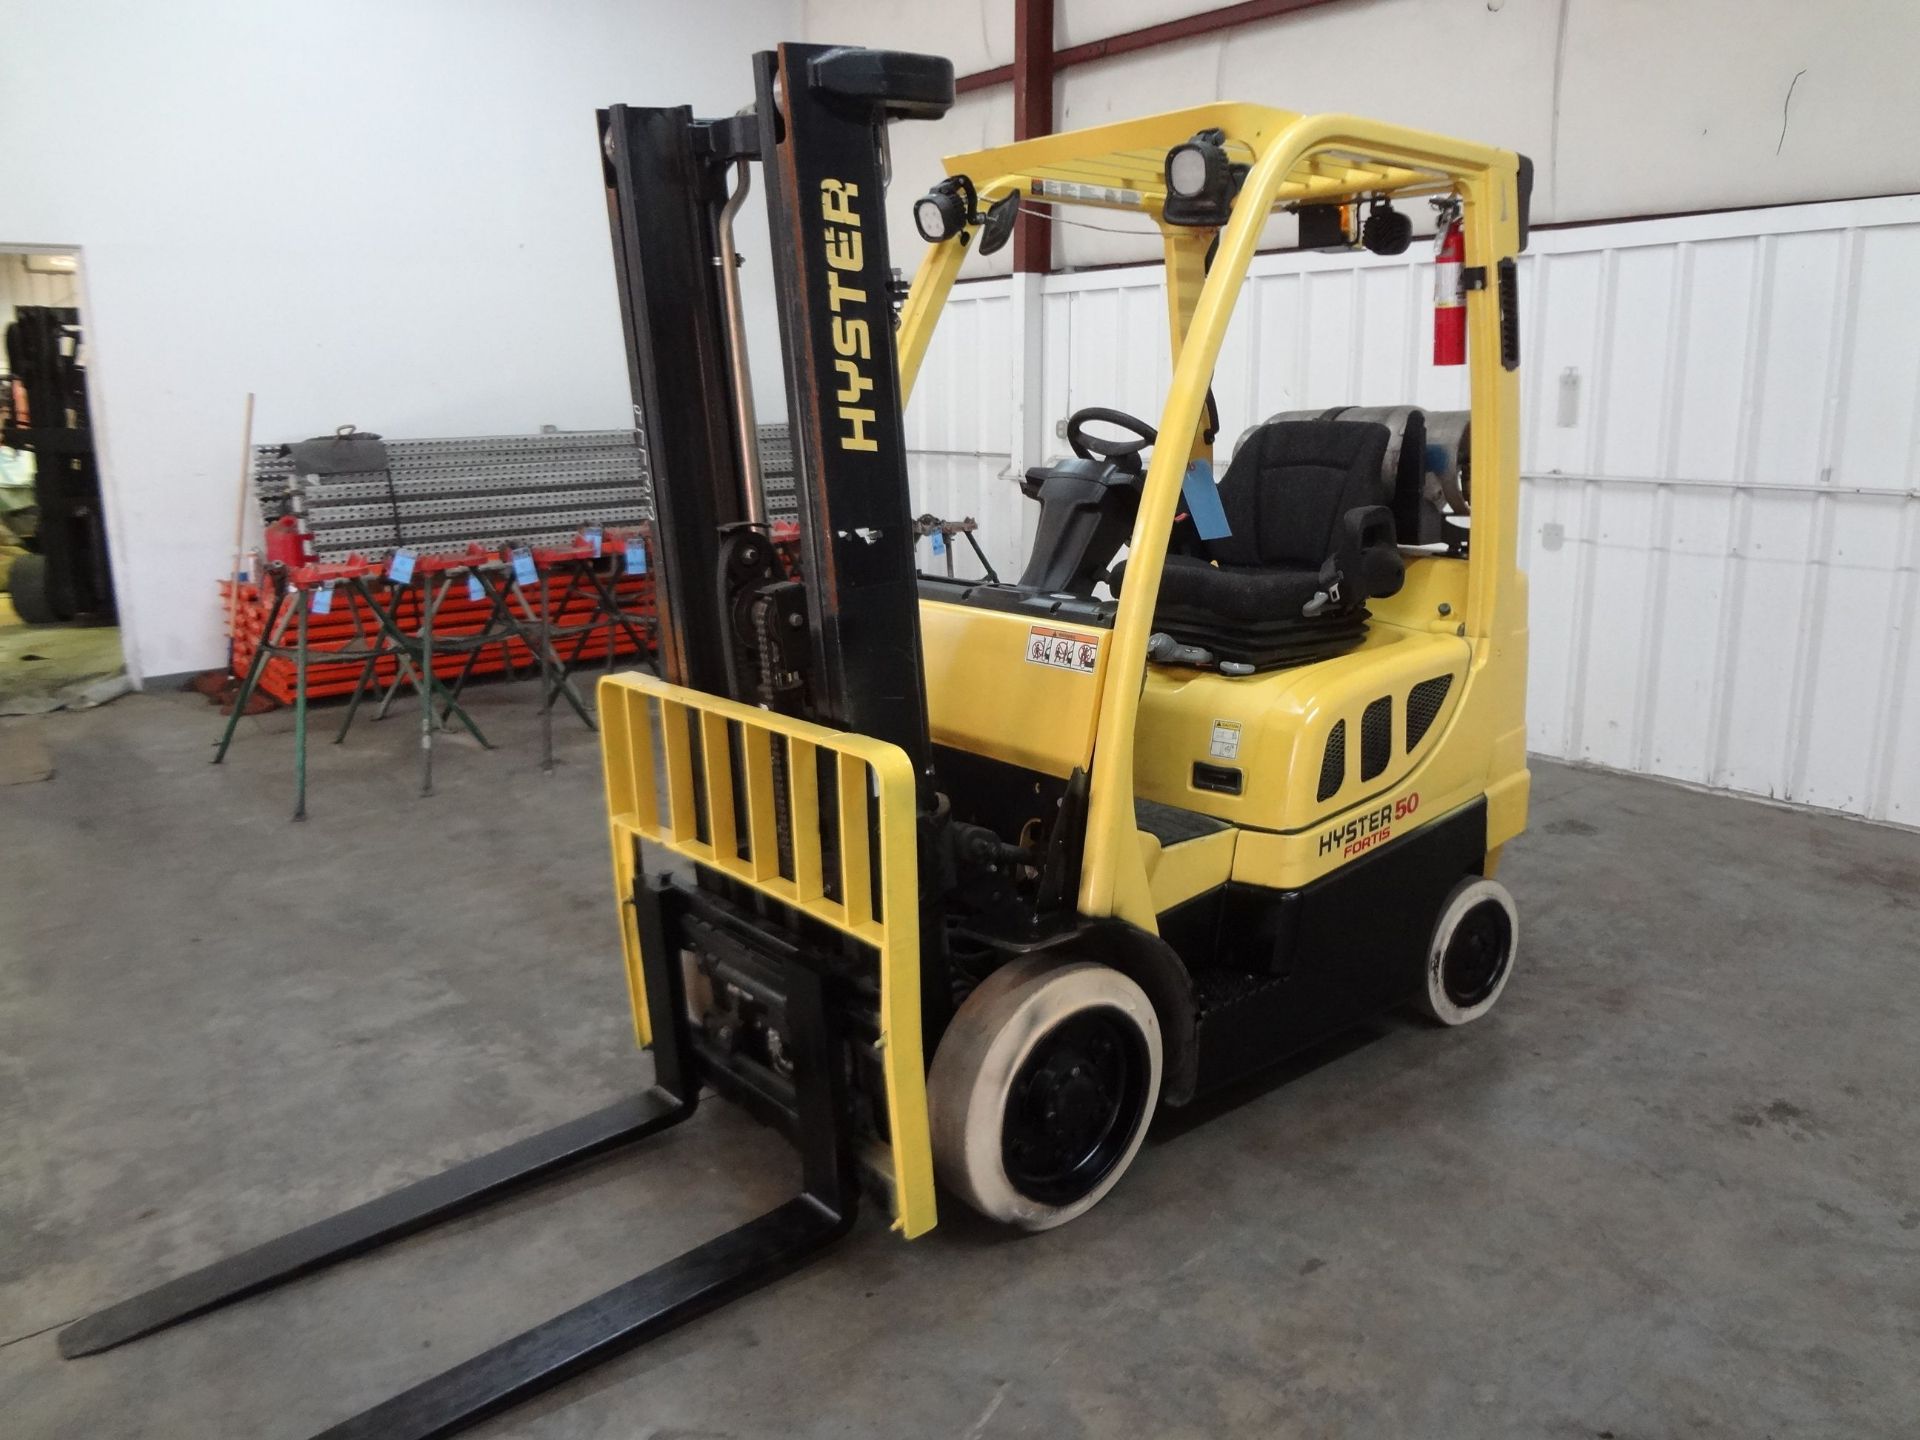 5,000 LB. HYSTER MODEL S50FT SOLID TIRE LP GAS LIFT TRUCK; S/N F187V17754J, 2-STAGE MAST, 84" MAST